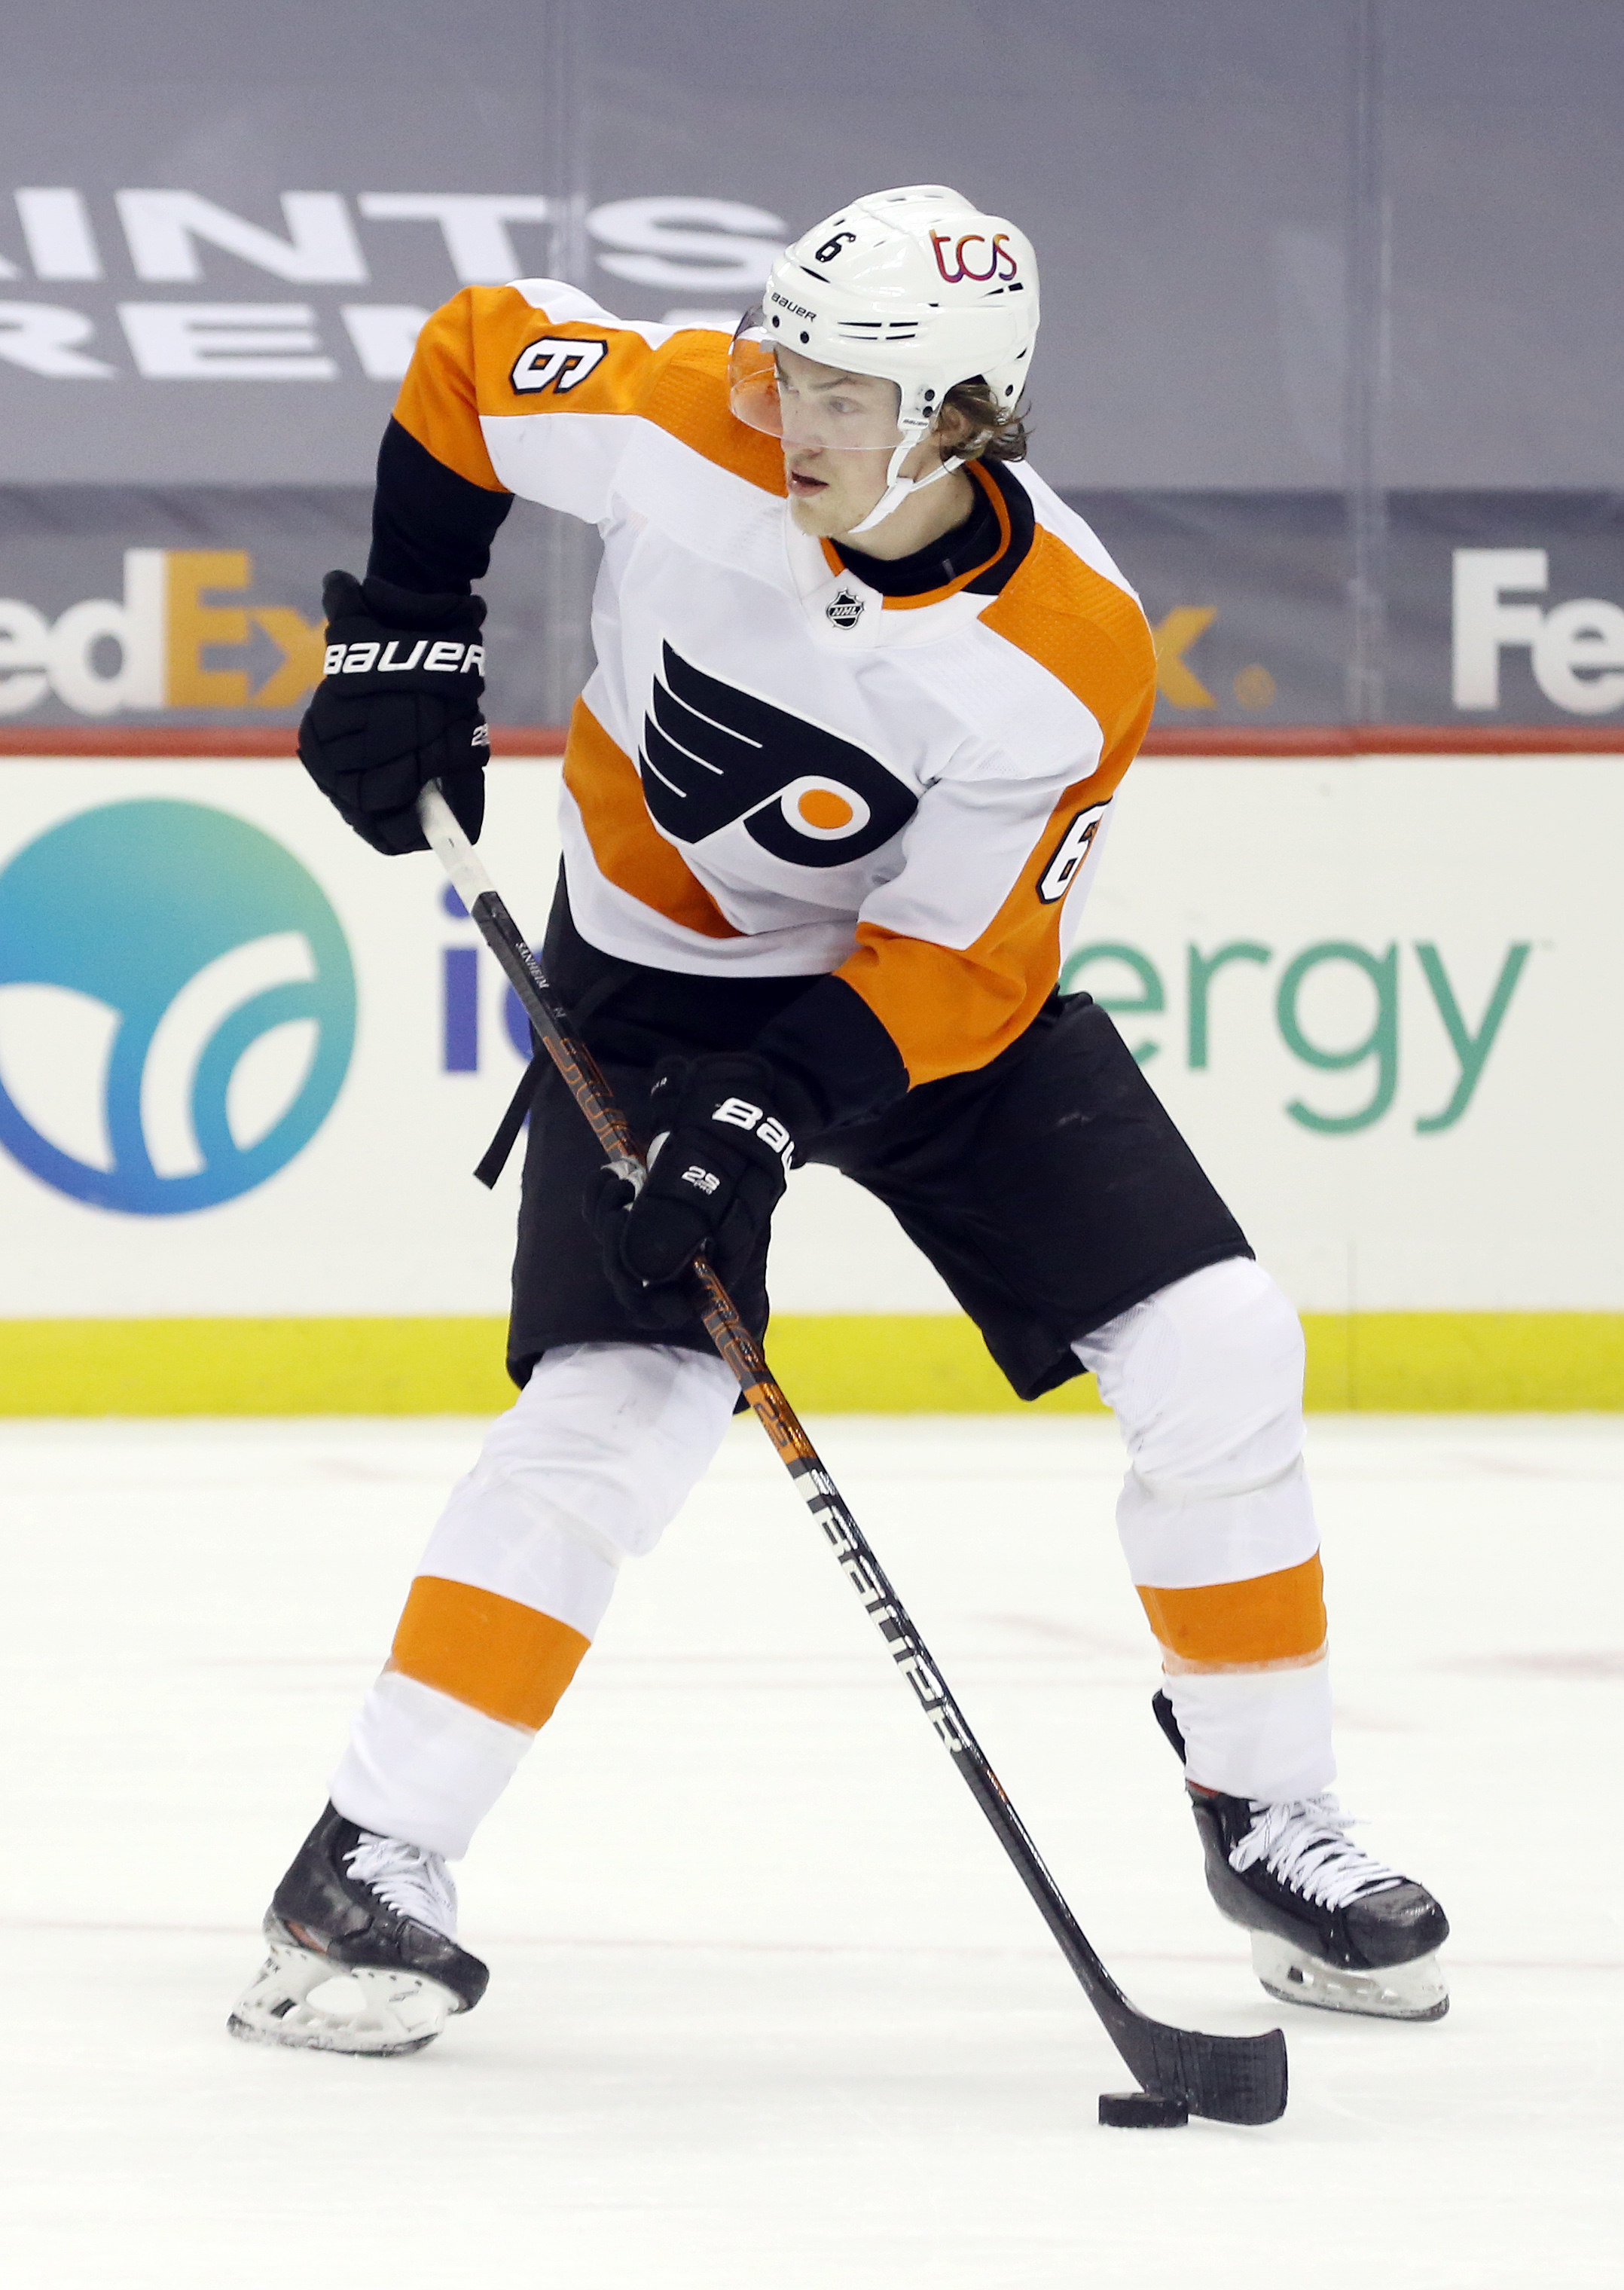 Samuel Morin, forward? Flyers committed to giving position change